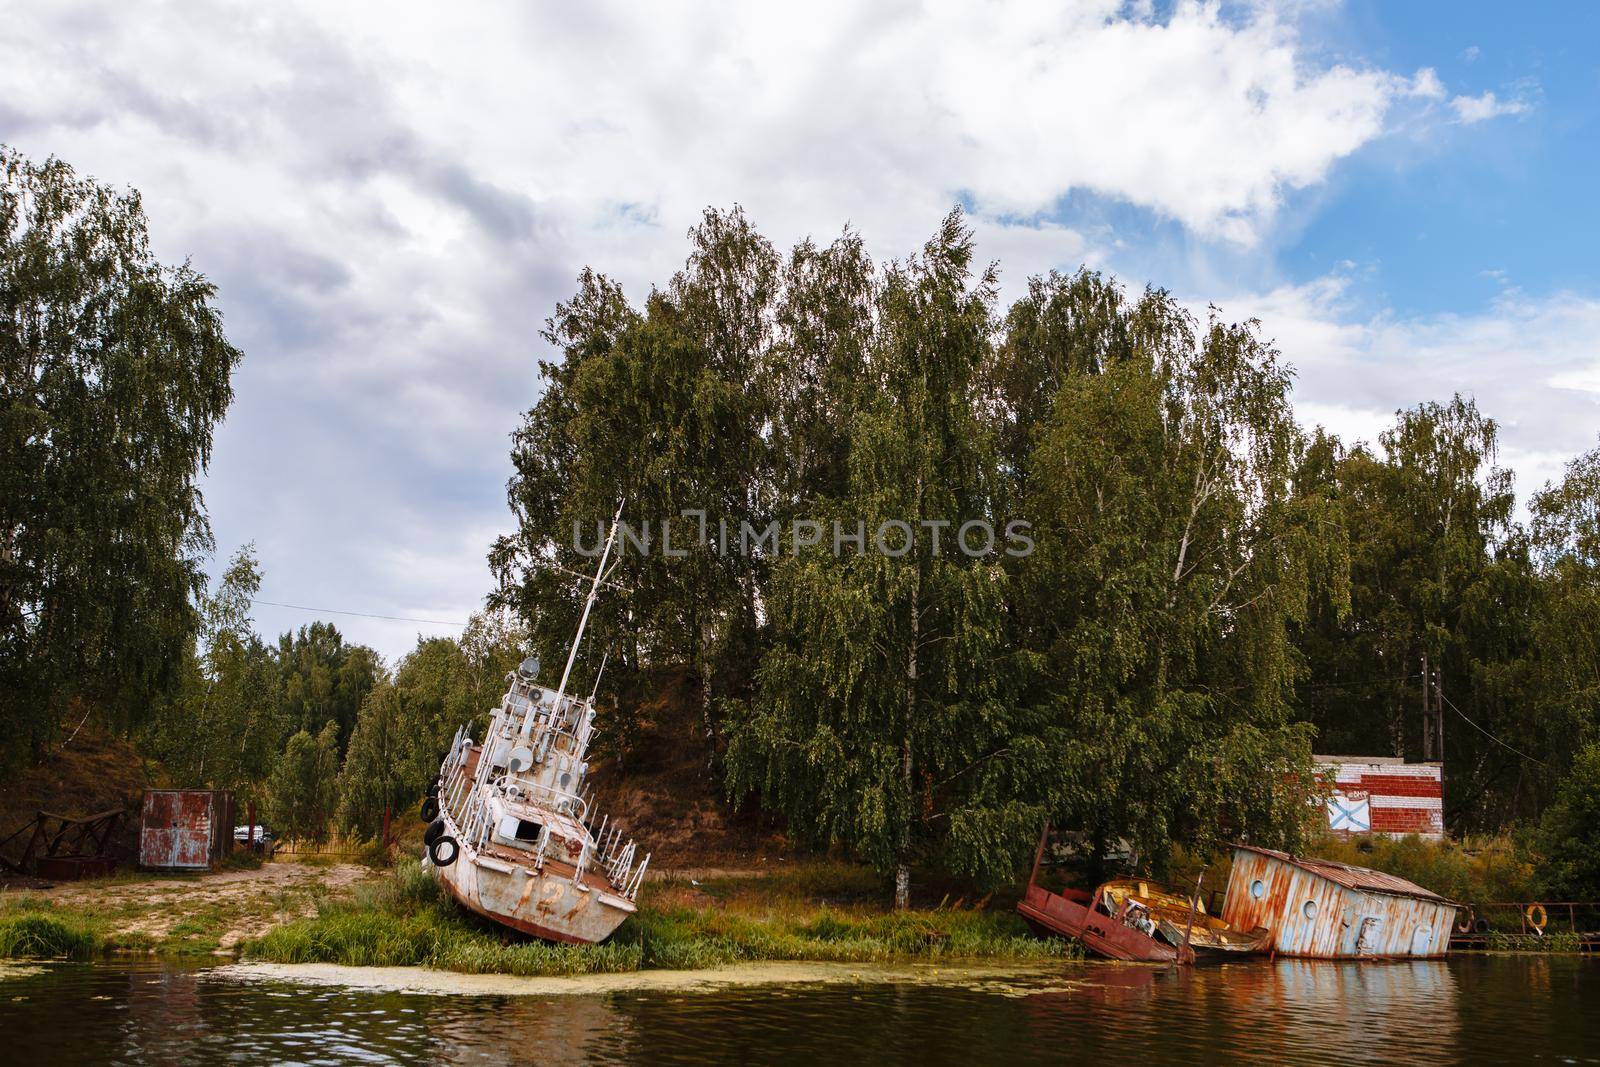 An old rusty military ship, stranded. The ship has served its time by deandy